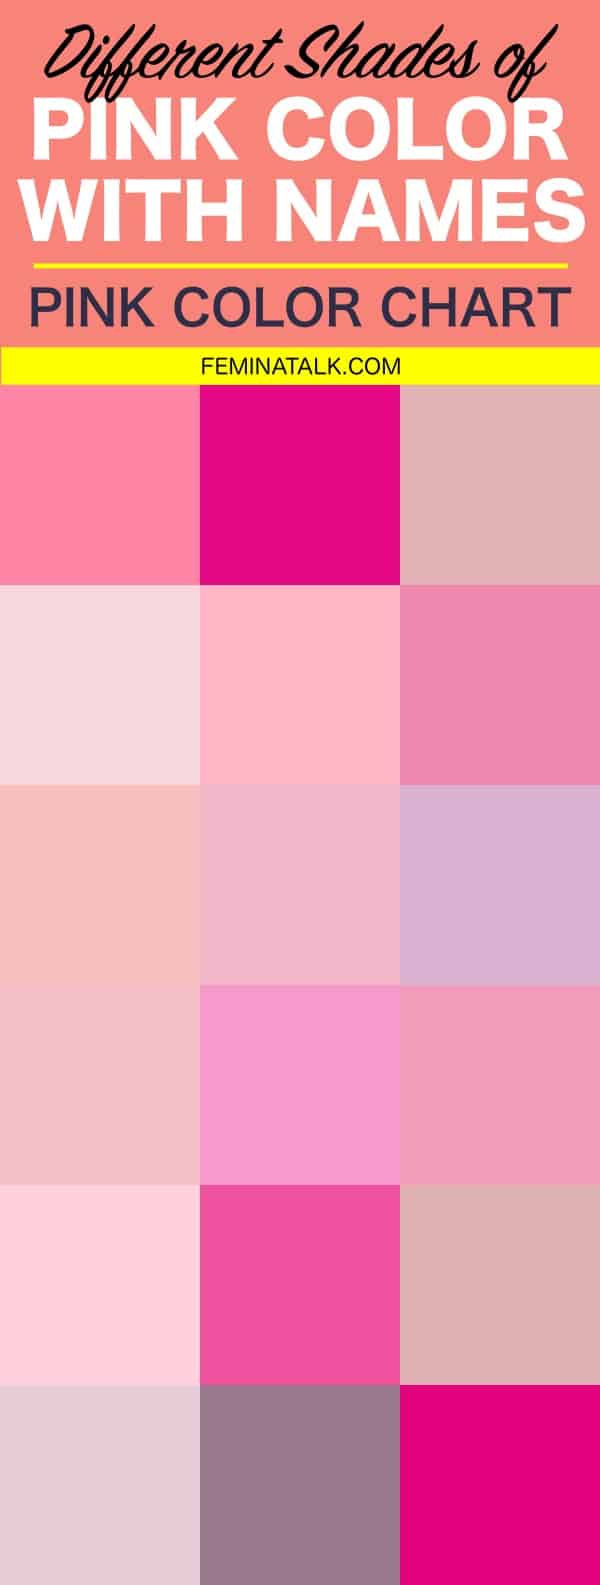 Different Shades of Pink Color with Names